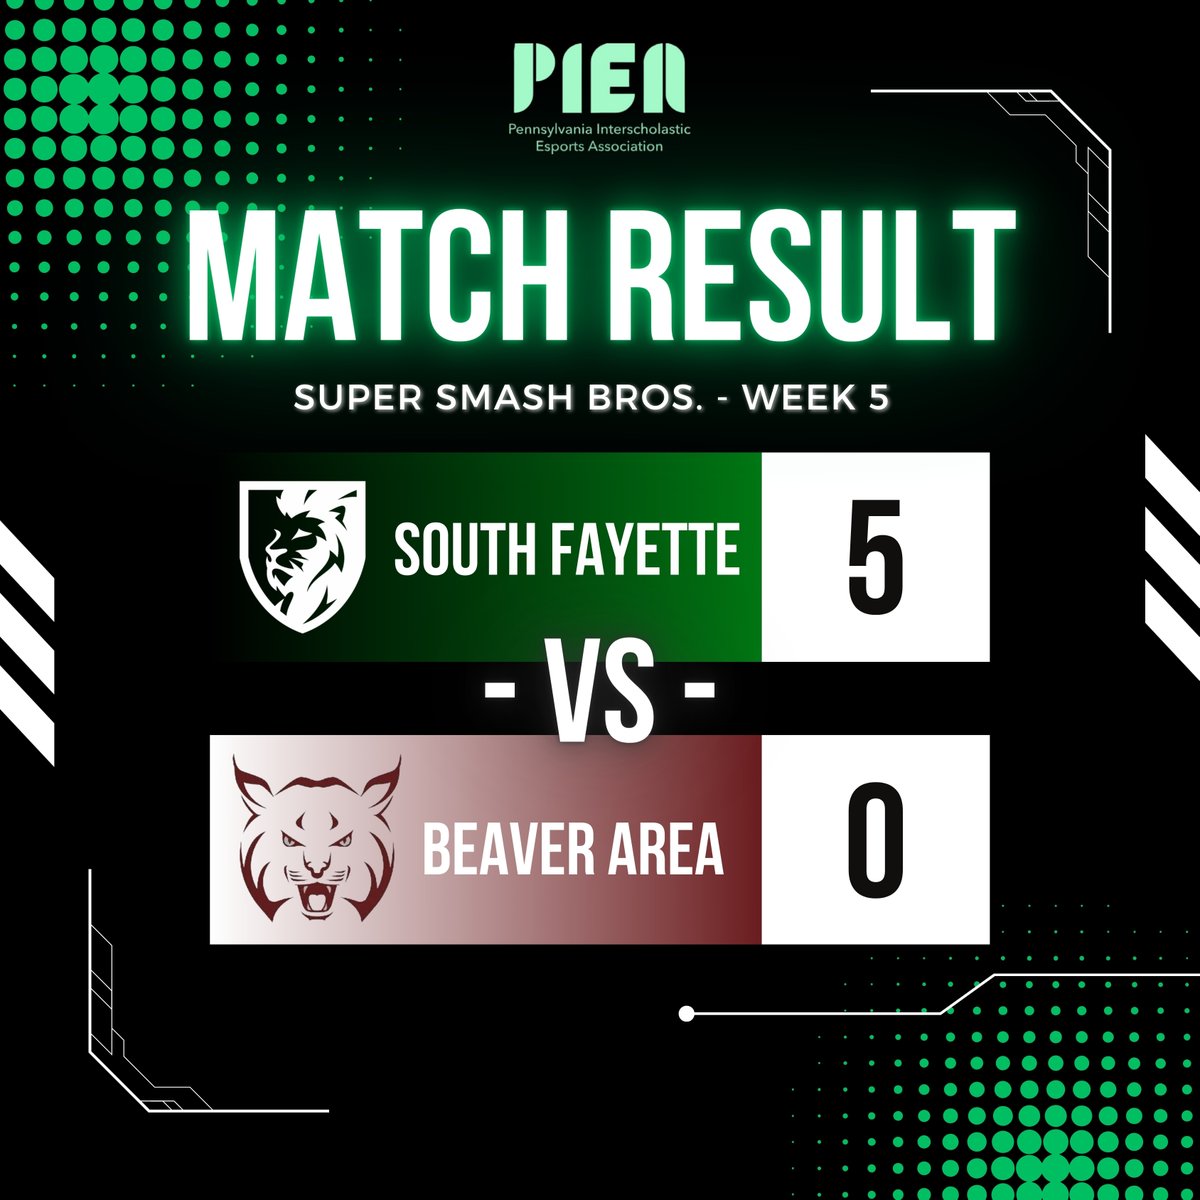 Excellent showing from our HS Super Smash Bros. Team this week! Proudly moving into Week 6 of the @piea_esports Regular Season! #SFLionPride #SFHSLionPride